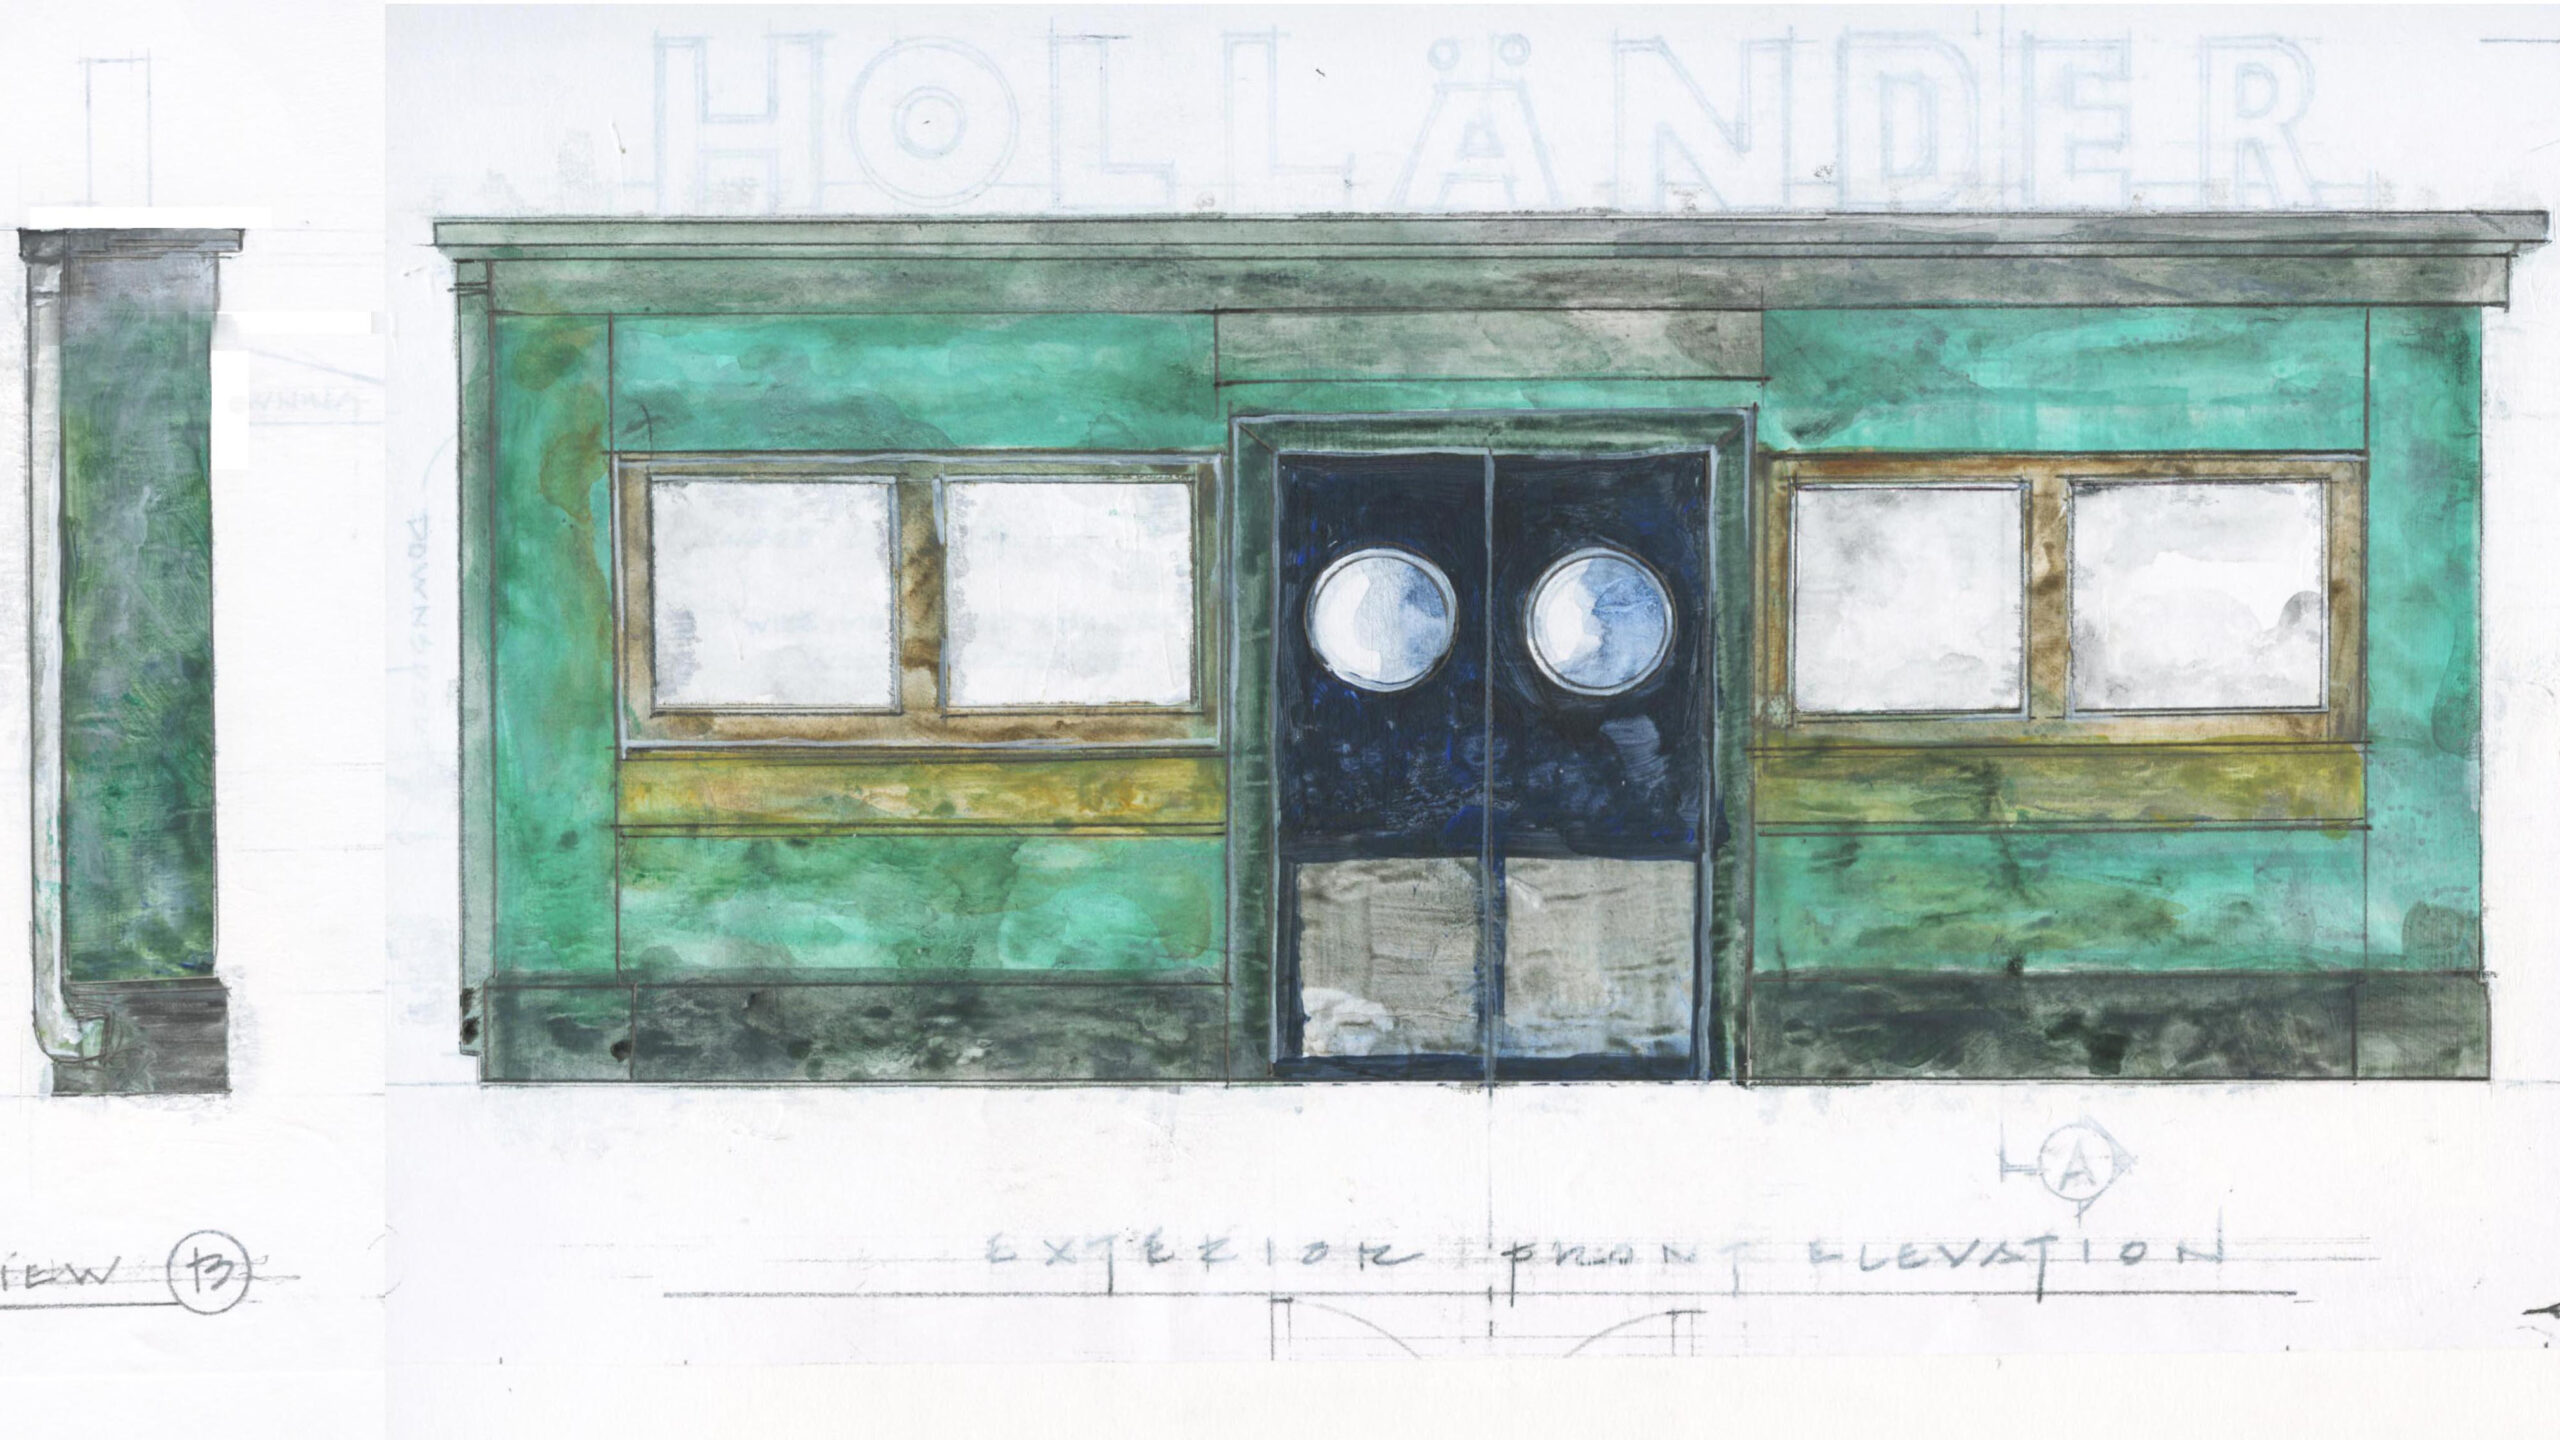 Drawing of a blue building with navy double doors in te middle with window pairs on each side